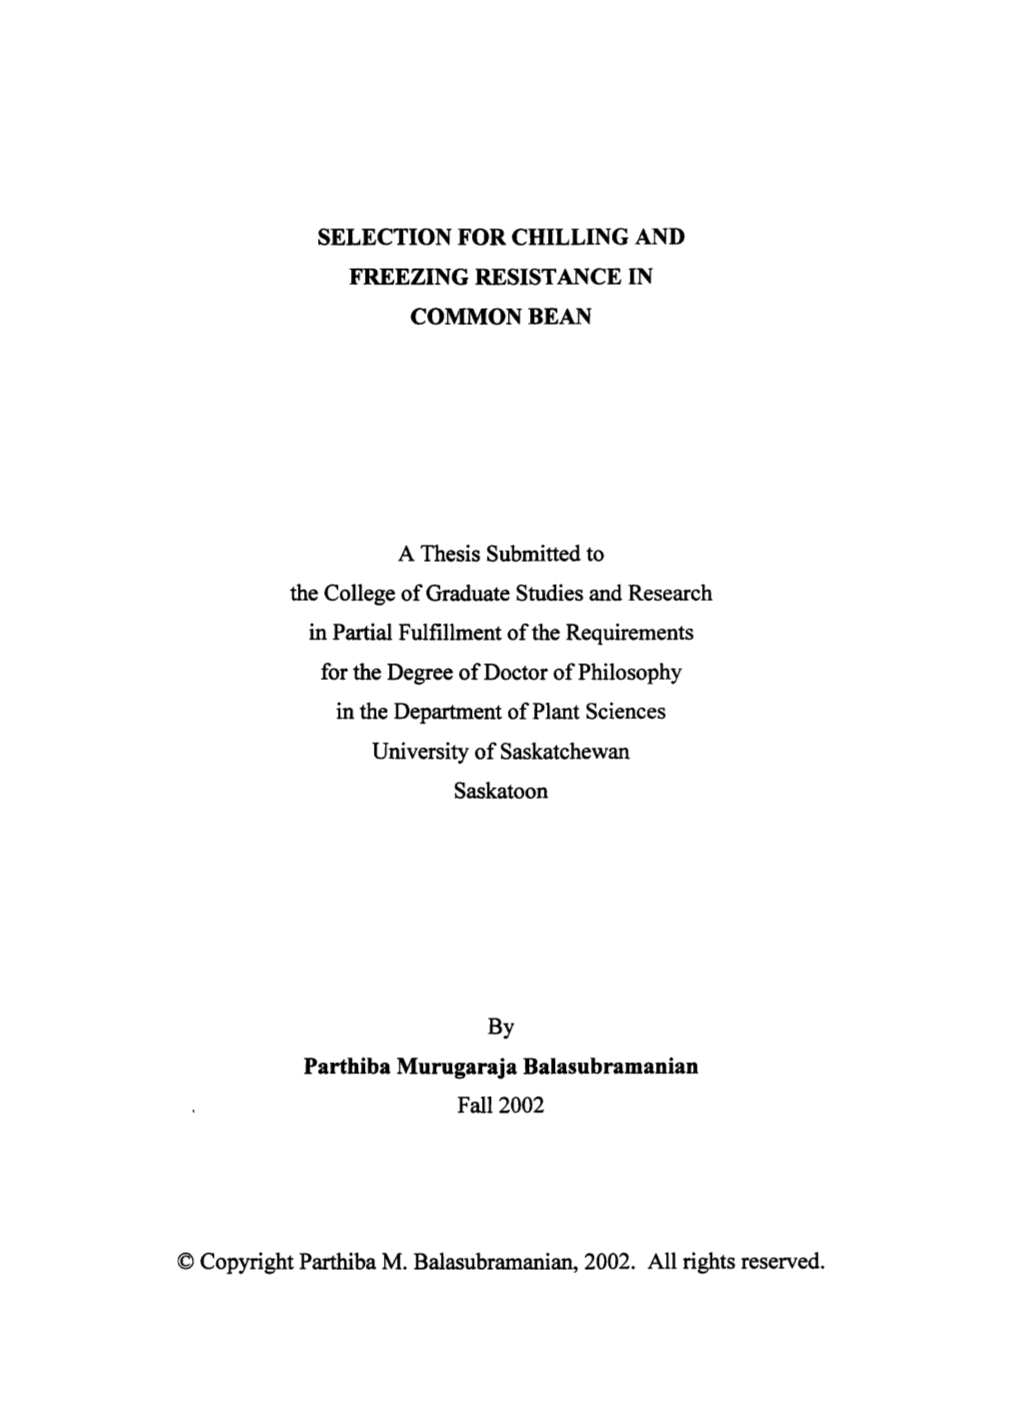 COMMON BEAN a Thesis Submitted to the College of Graduate Studies